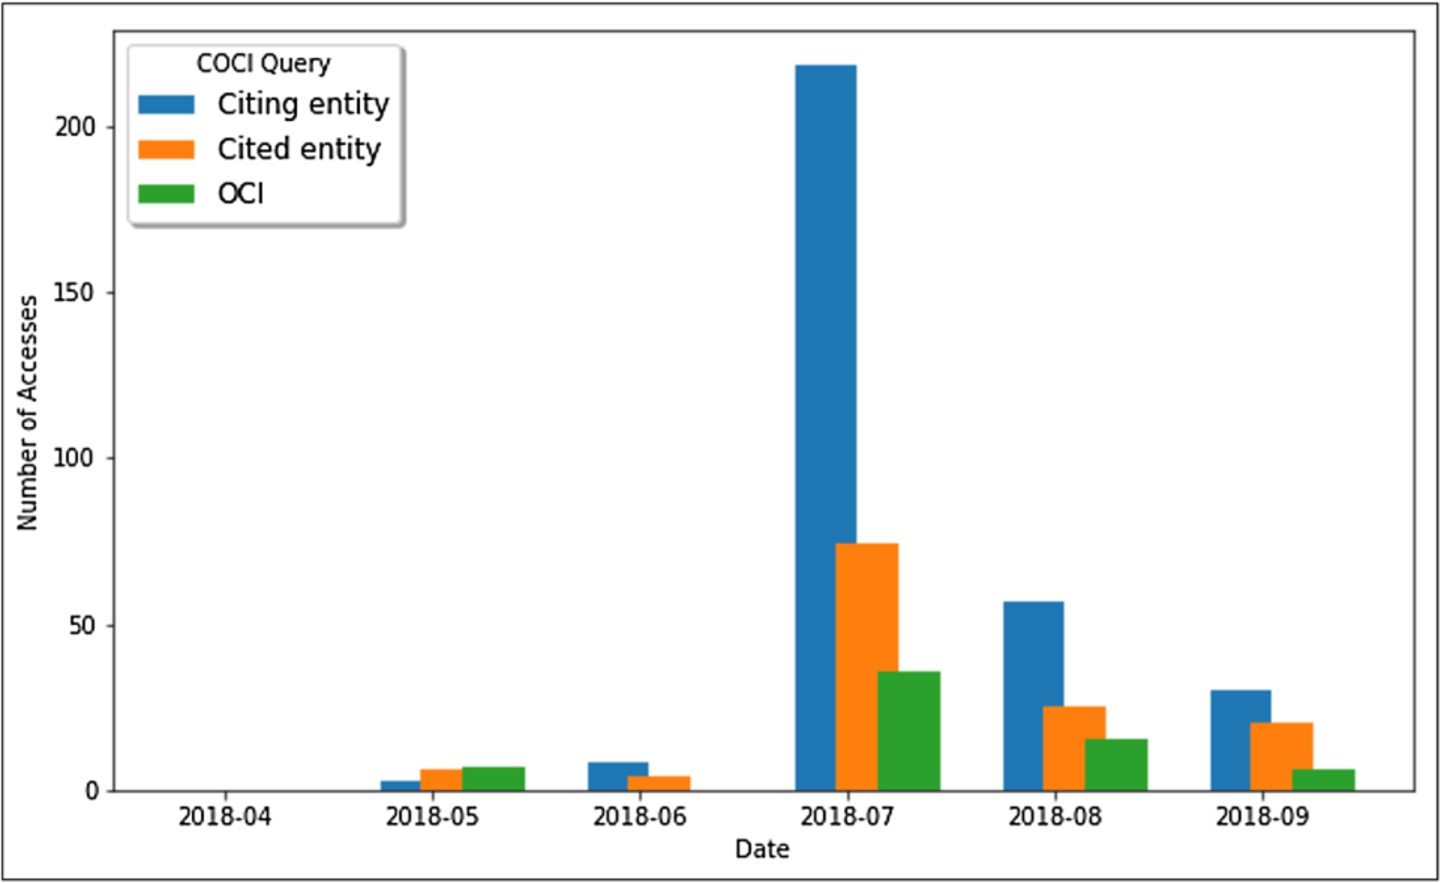 The number of queries launched through OSCAR from the OpenCitations web site, searching inside the COCI dataset, for each different month starting from April 2018 to September 2018. The results show the number of searches per month for a citing entity by specifying its DOI (blue), for a cited entity by specifying its DOI (orange), and for a citation itself by specifying its open citation identifier (OCI),23 the globally unique persistent identifier for a bibliographic citation.